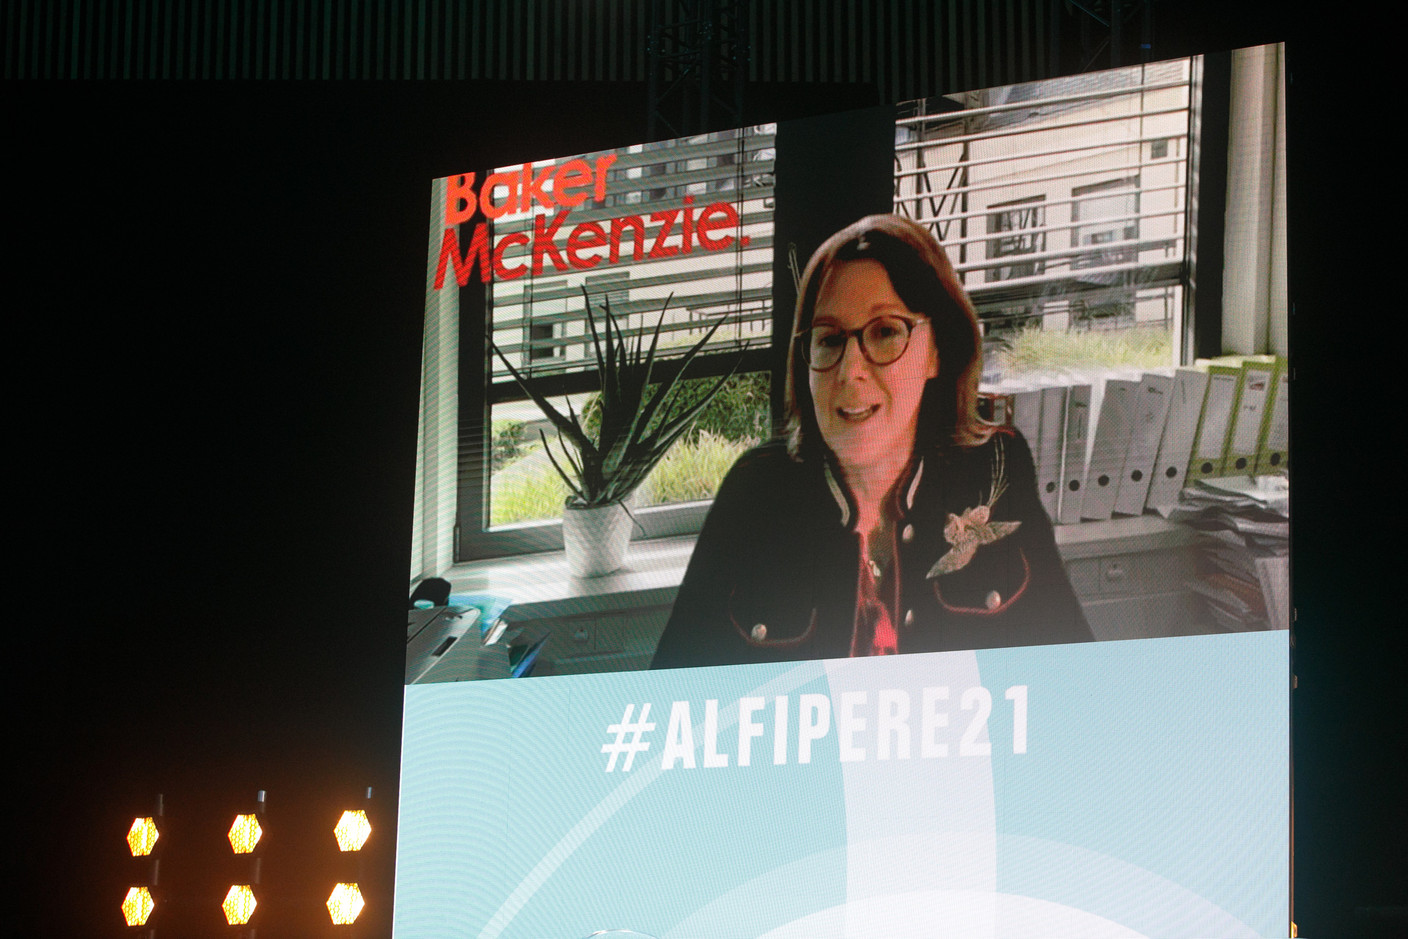 Catherine Martougin, partner at the law firm of Baker & McKenzie in Luxembourg, is seen speaking on the “Investing in Infrastructure” panel during Alfi’s PE & RE conference, 1 December 2021. Photo: Matic Zorman